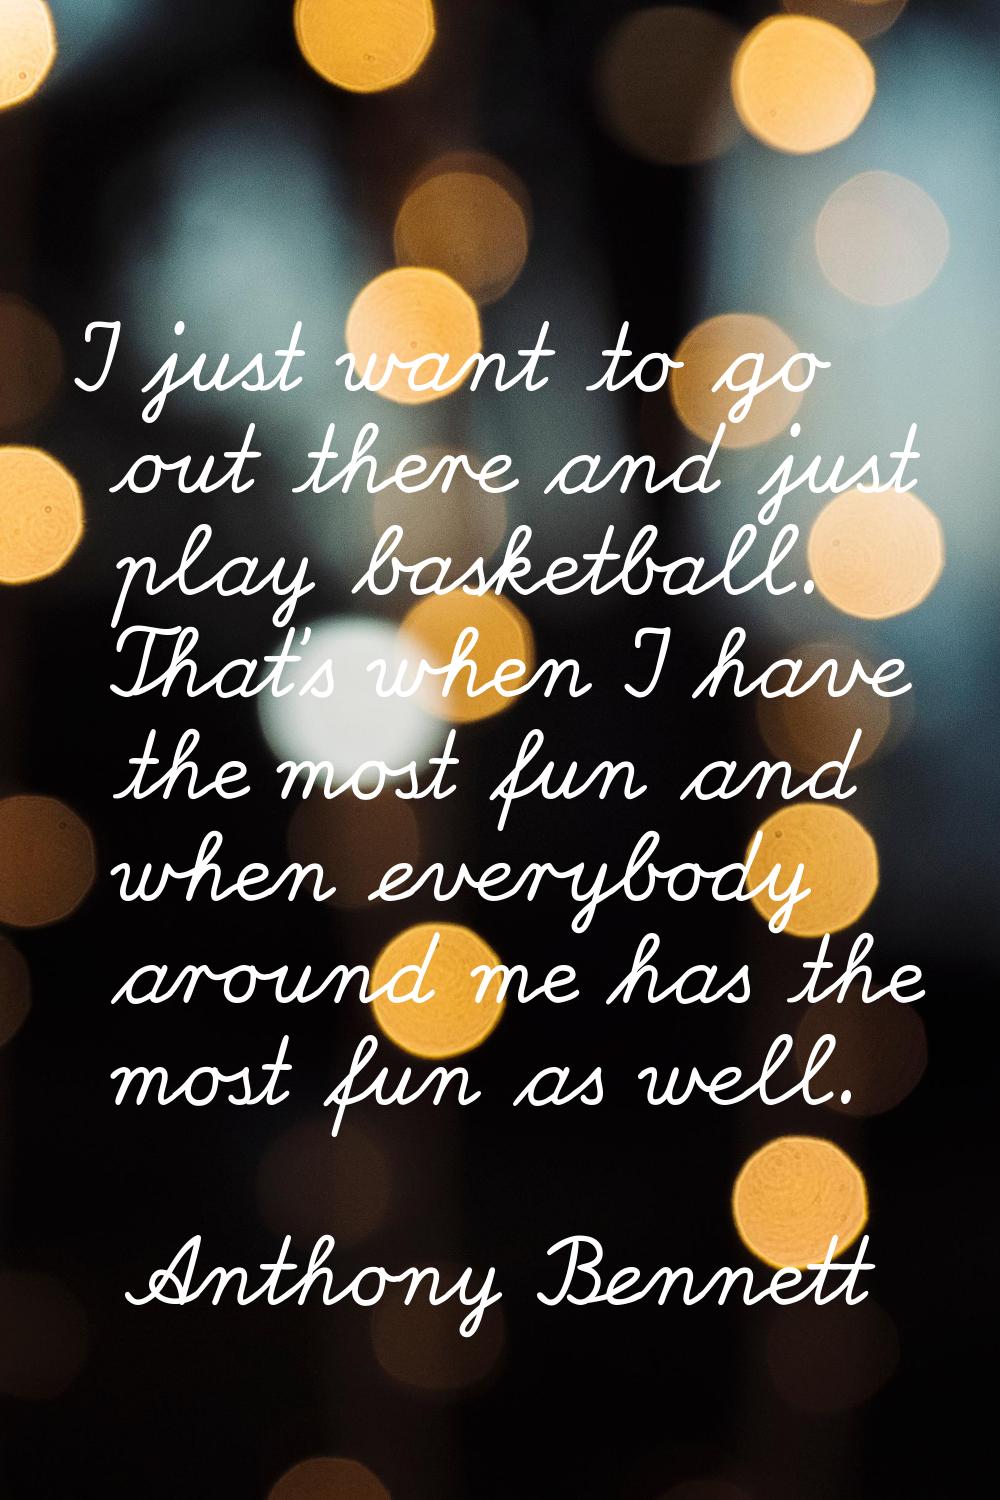 I just want to go out there and just play basketball. That's when I have the most fun and when ever